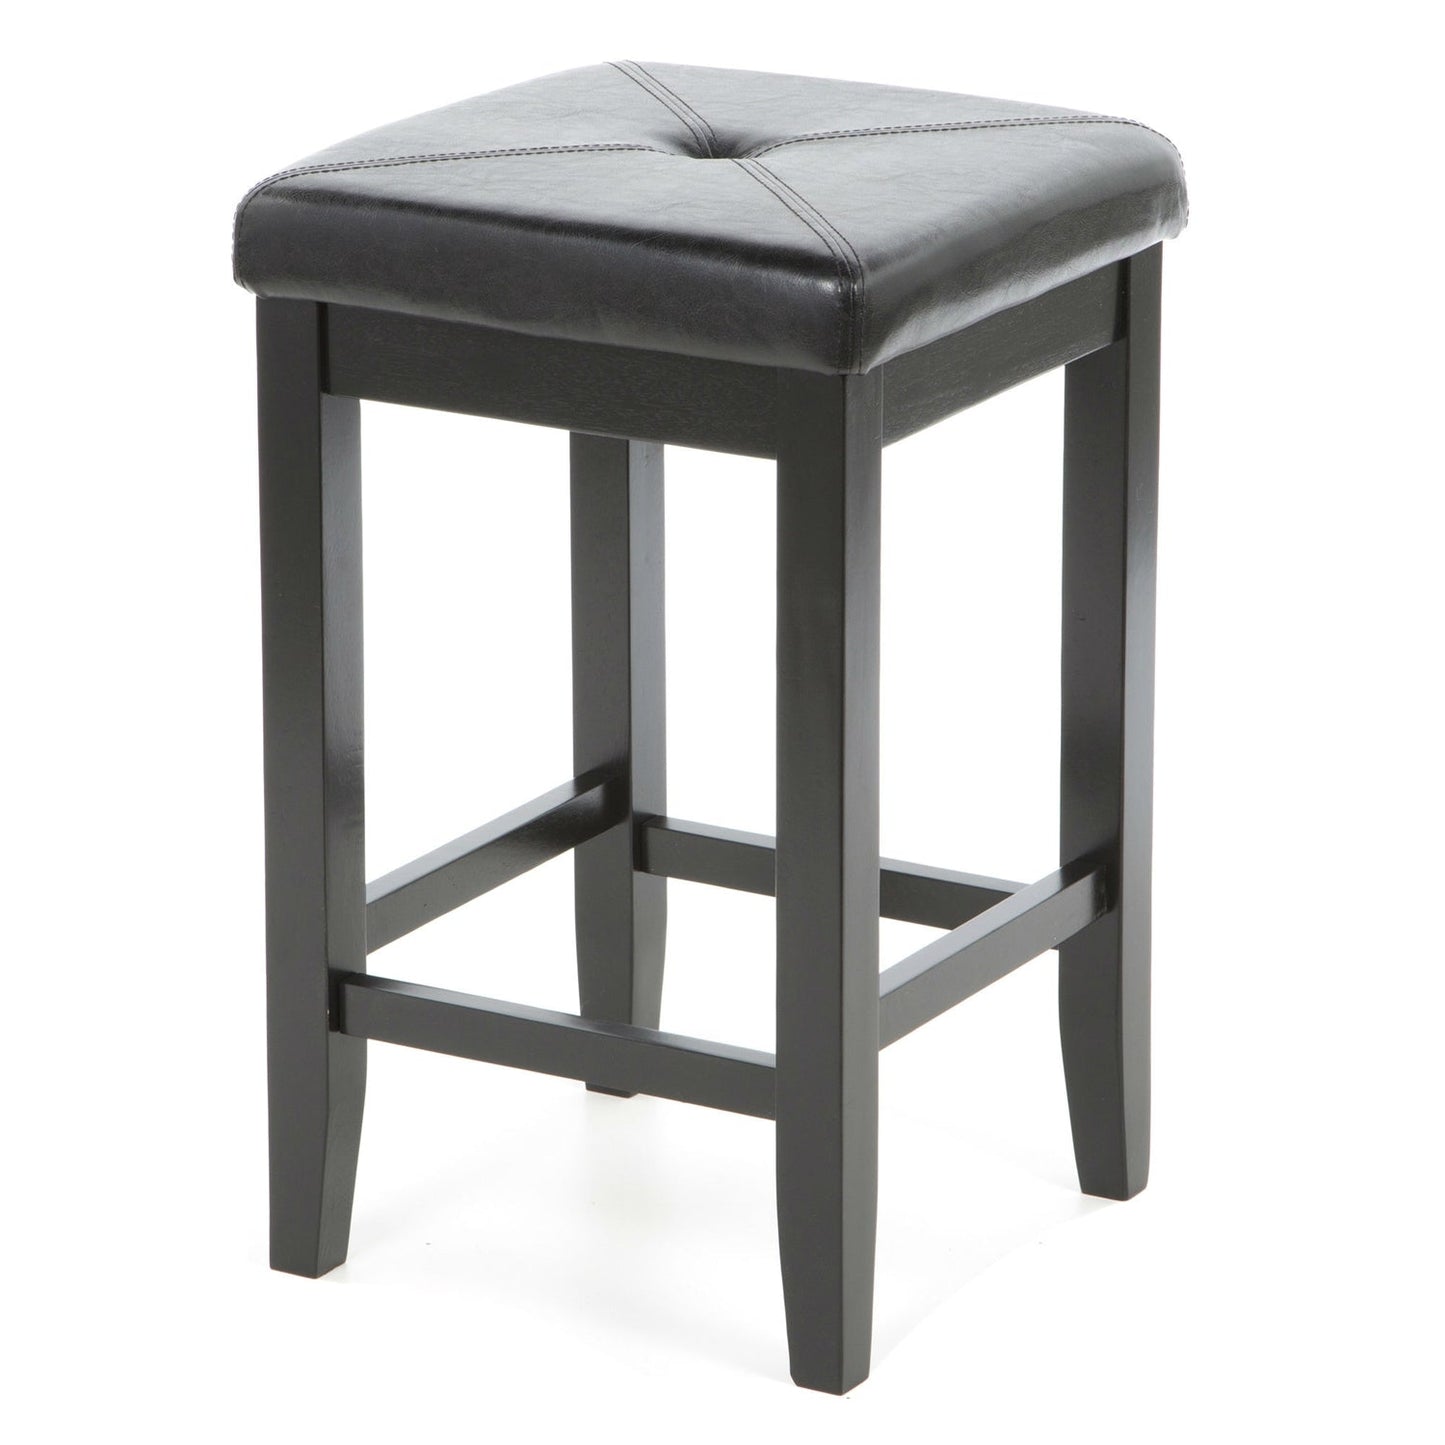 Dining > Barstools - Set Of 2 - Black Bar Stools 24-inch High W/ Cushion Faux Leather Seat